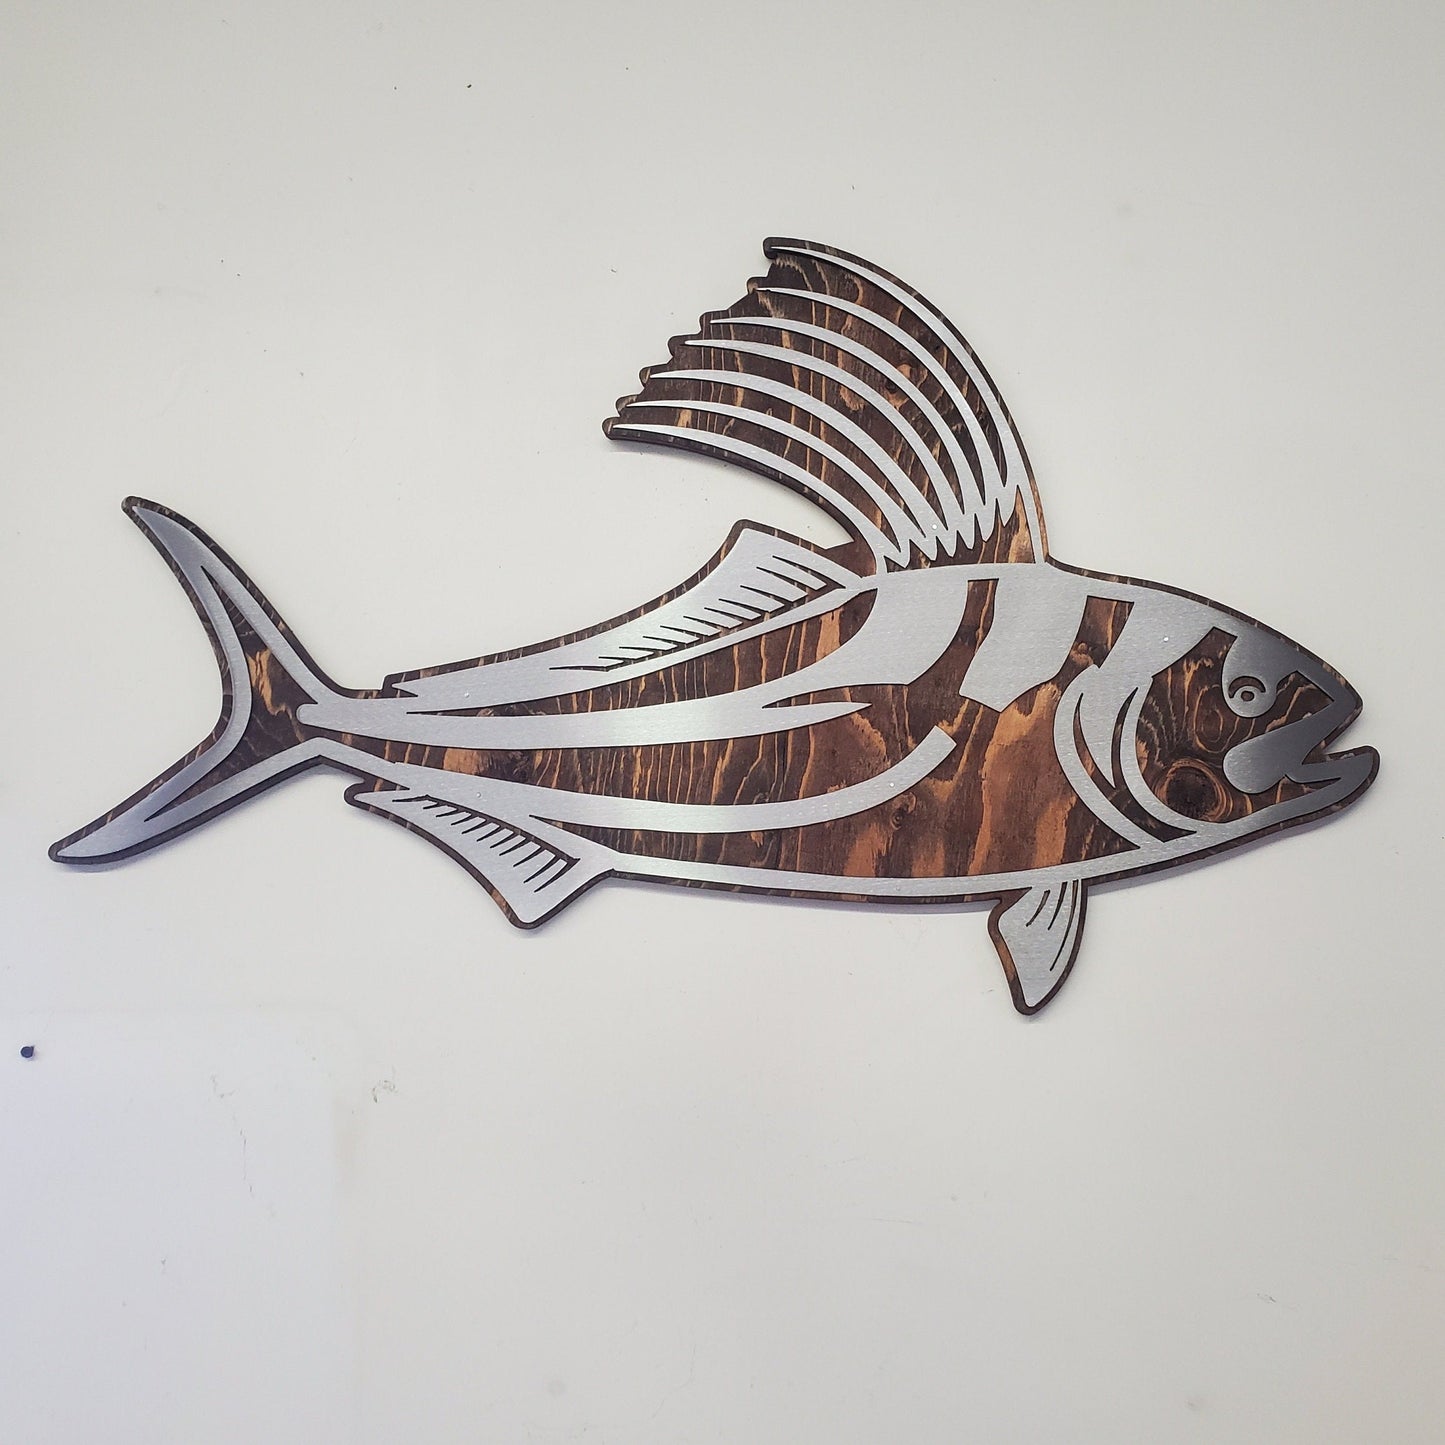 Rooster Fish Metal Art on Wood